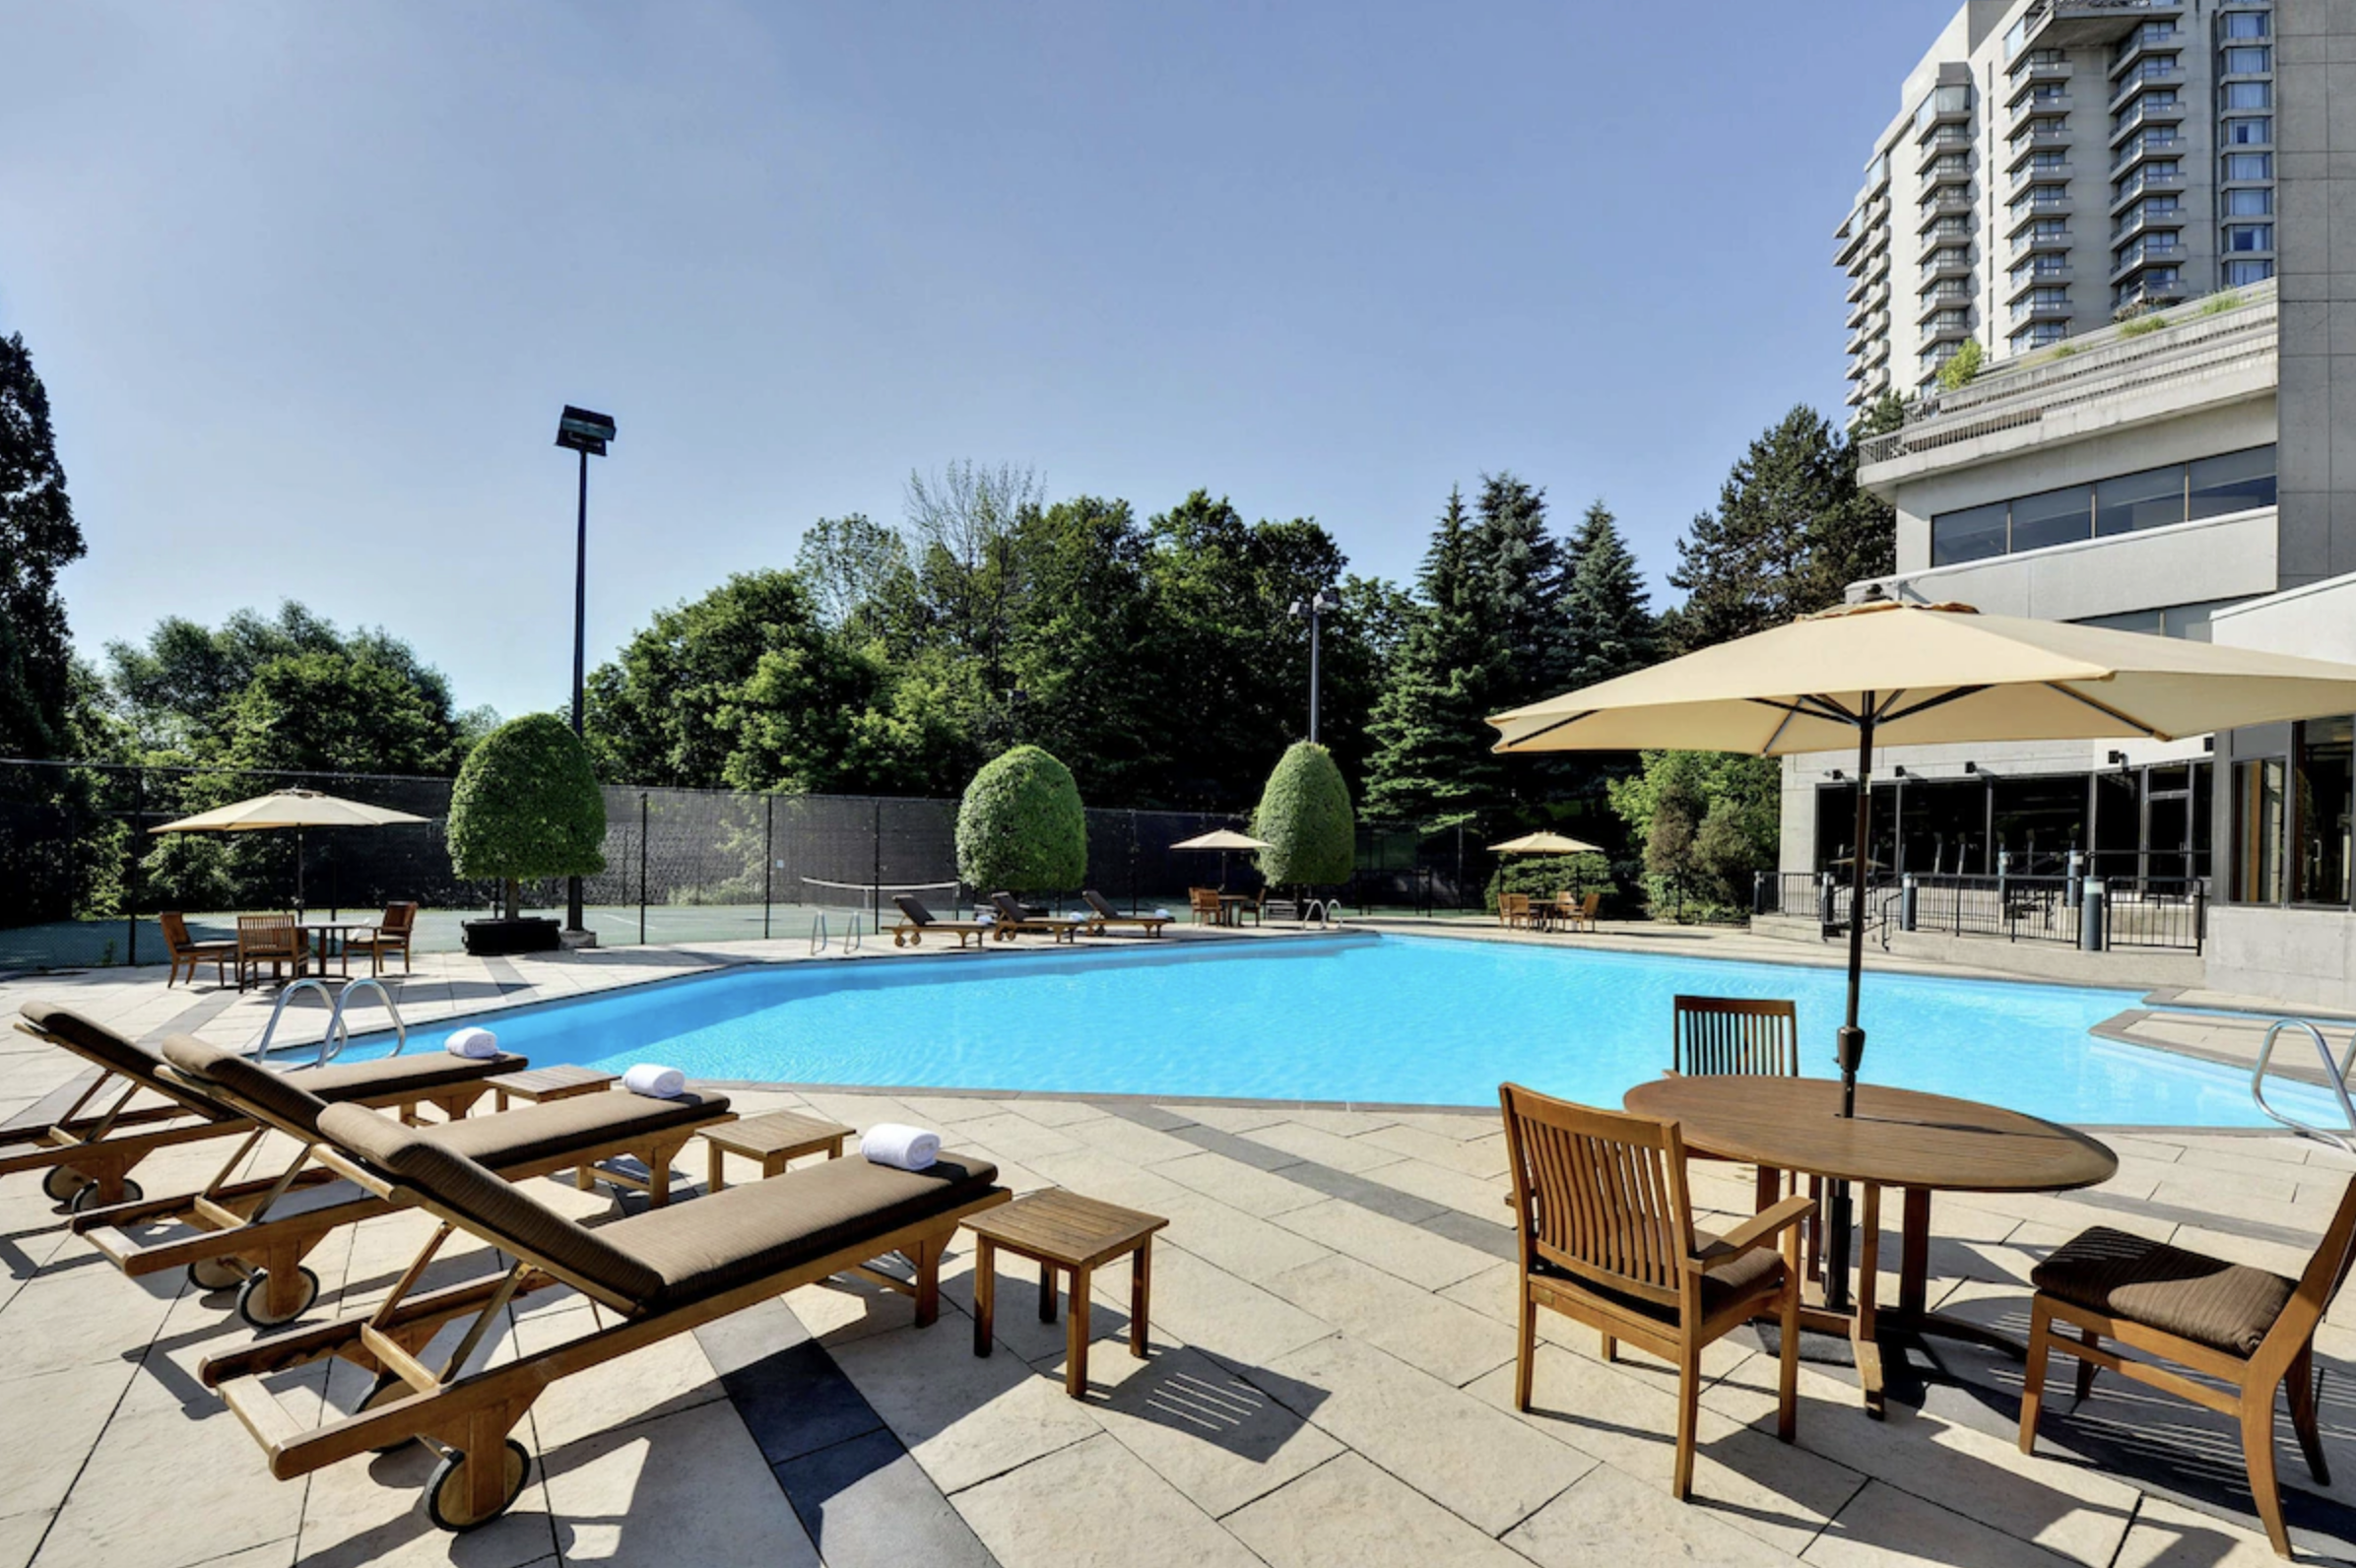 12. Pan Pacific Toronto - Best Hotels in Toronto with Rooftop Pools